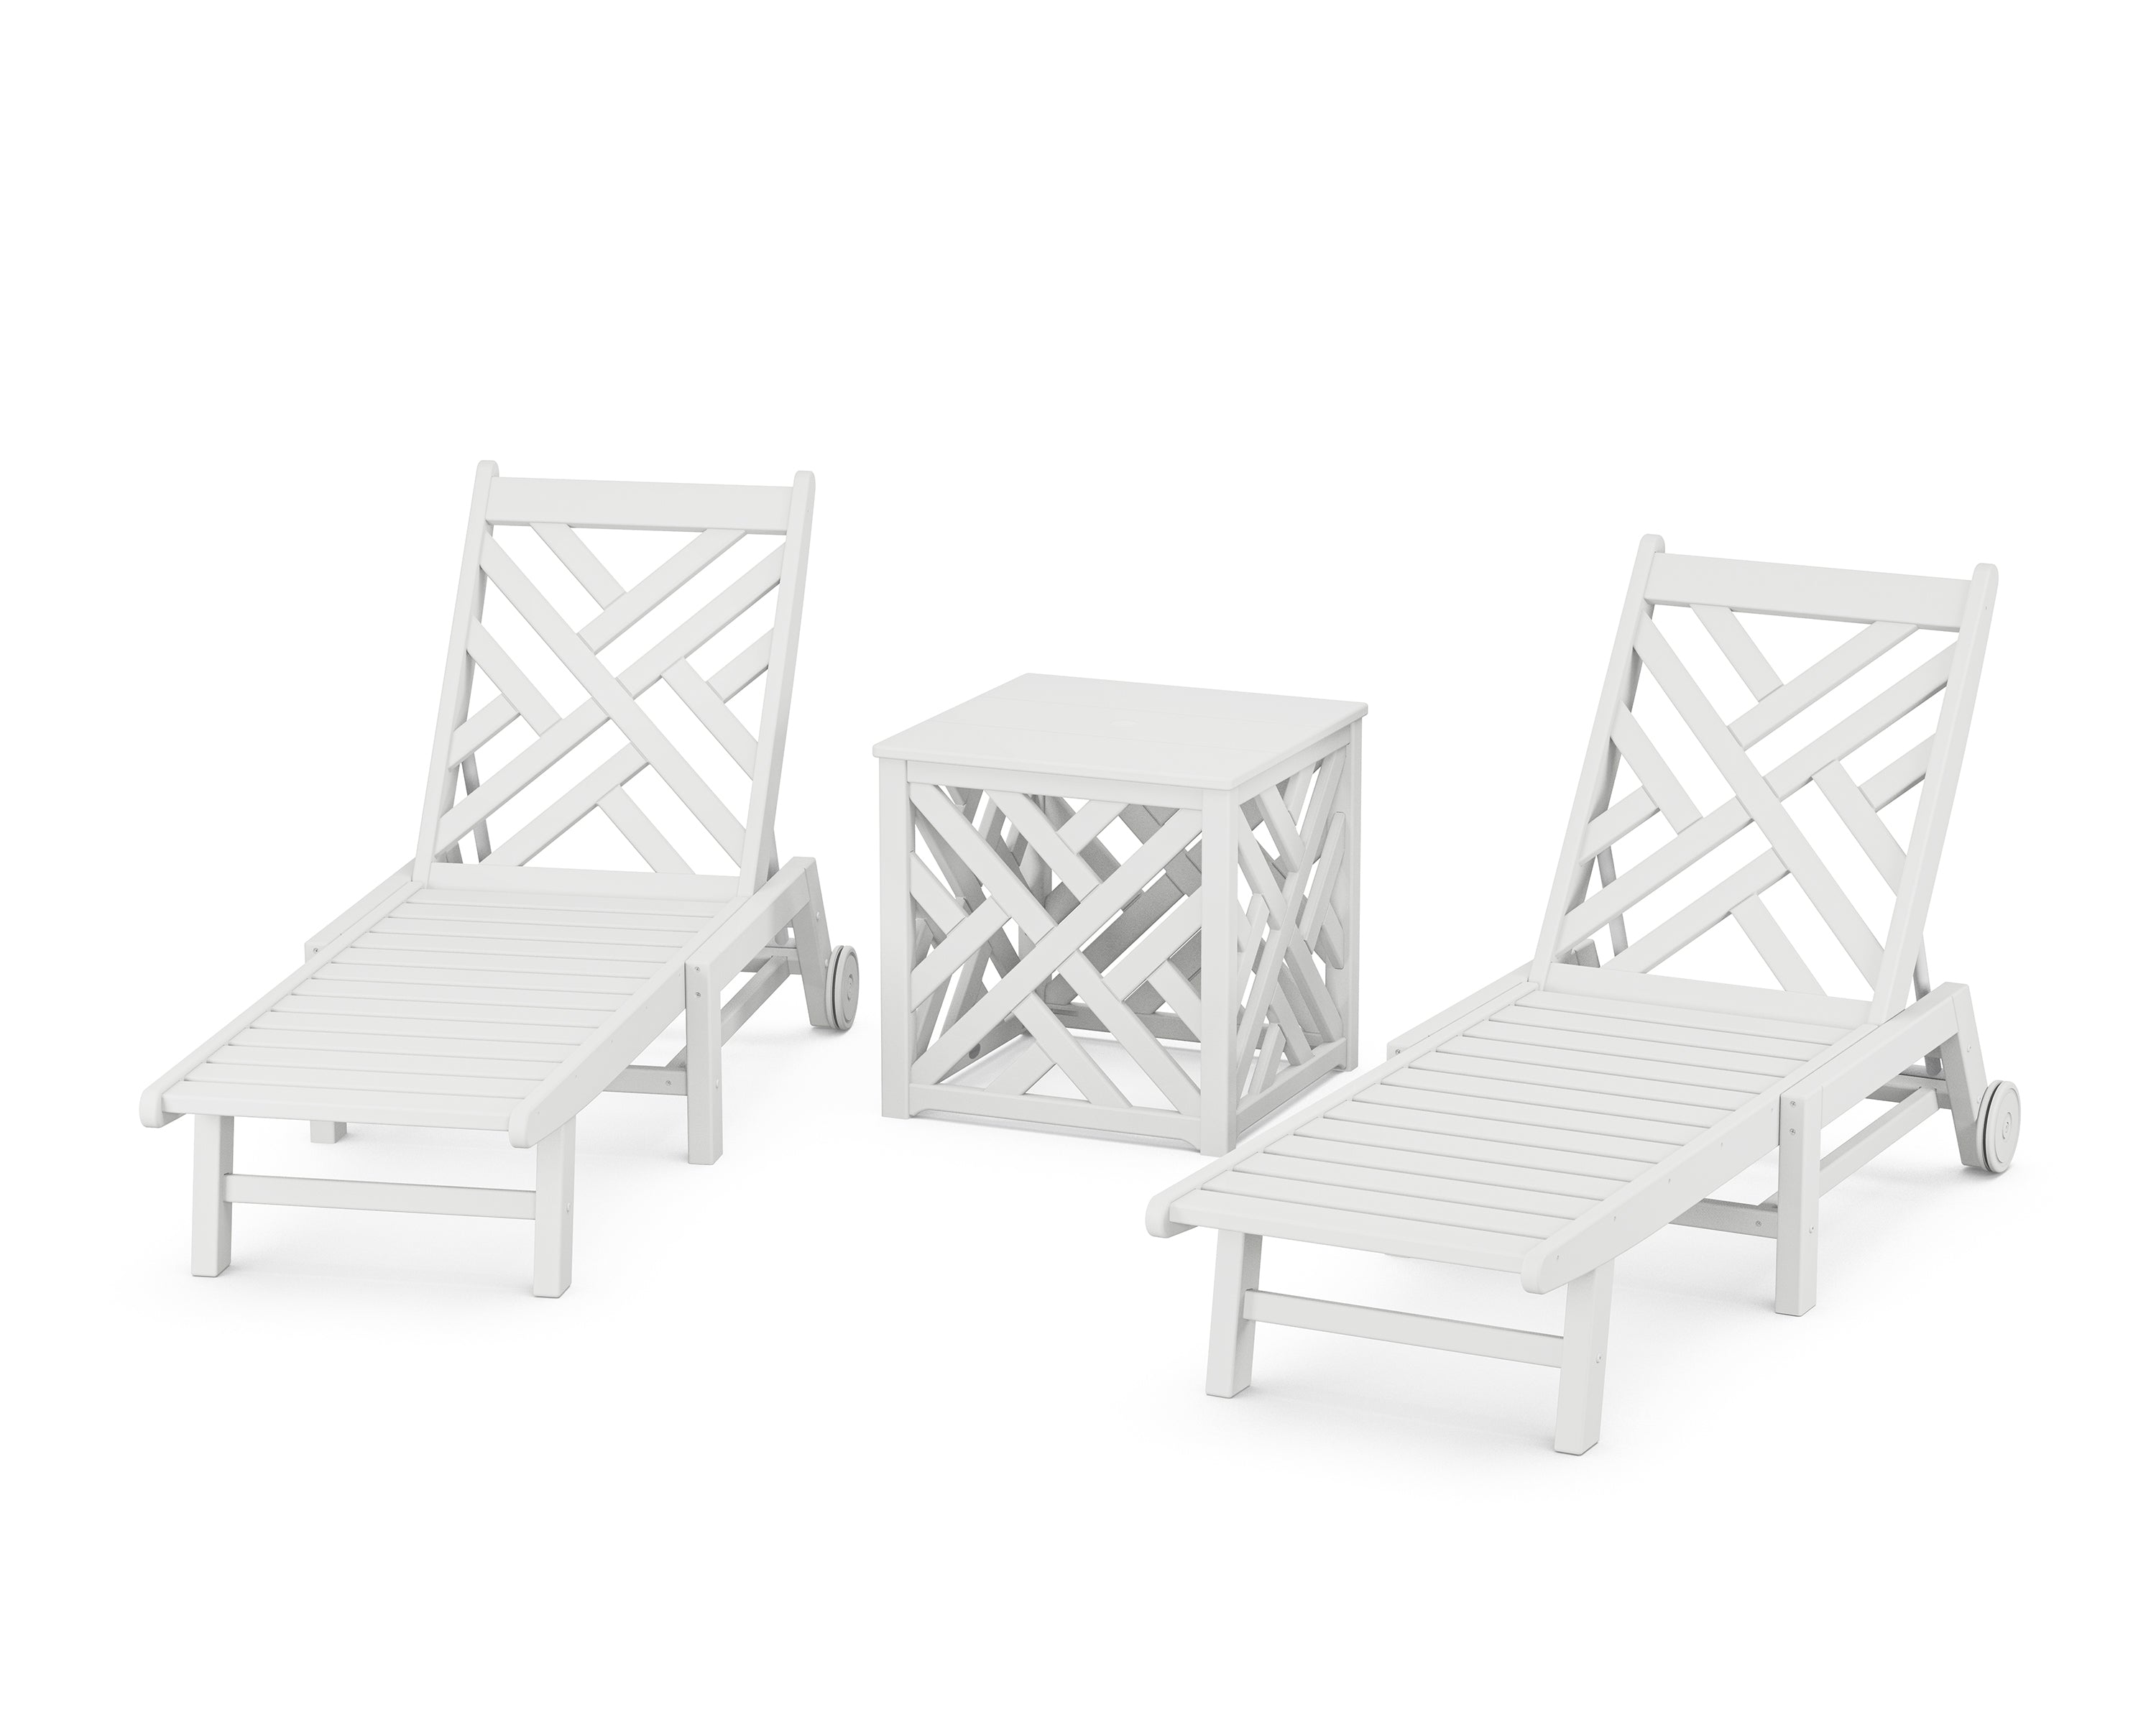 POLYWOOD Chippendale 3-Piece Chaise Set with Wheels and Umbrella Stand Accent Table in White